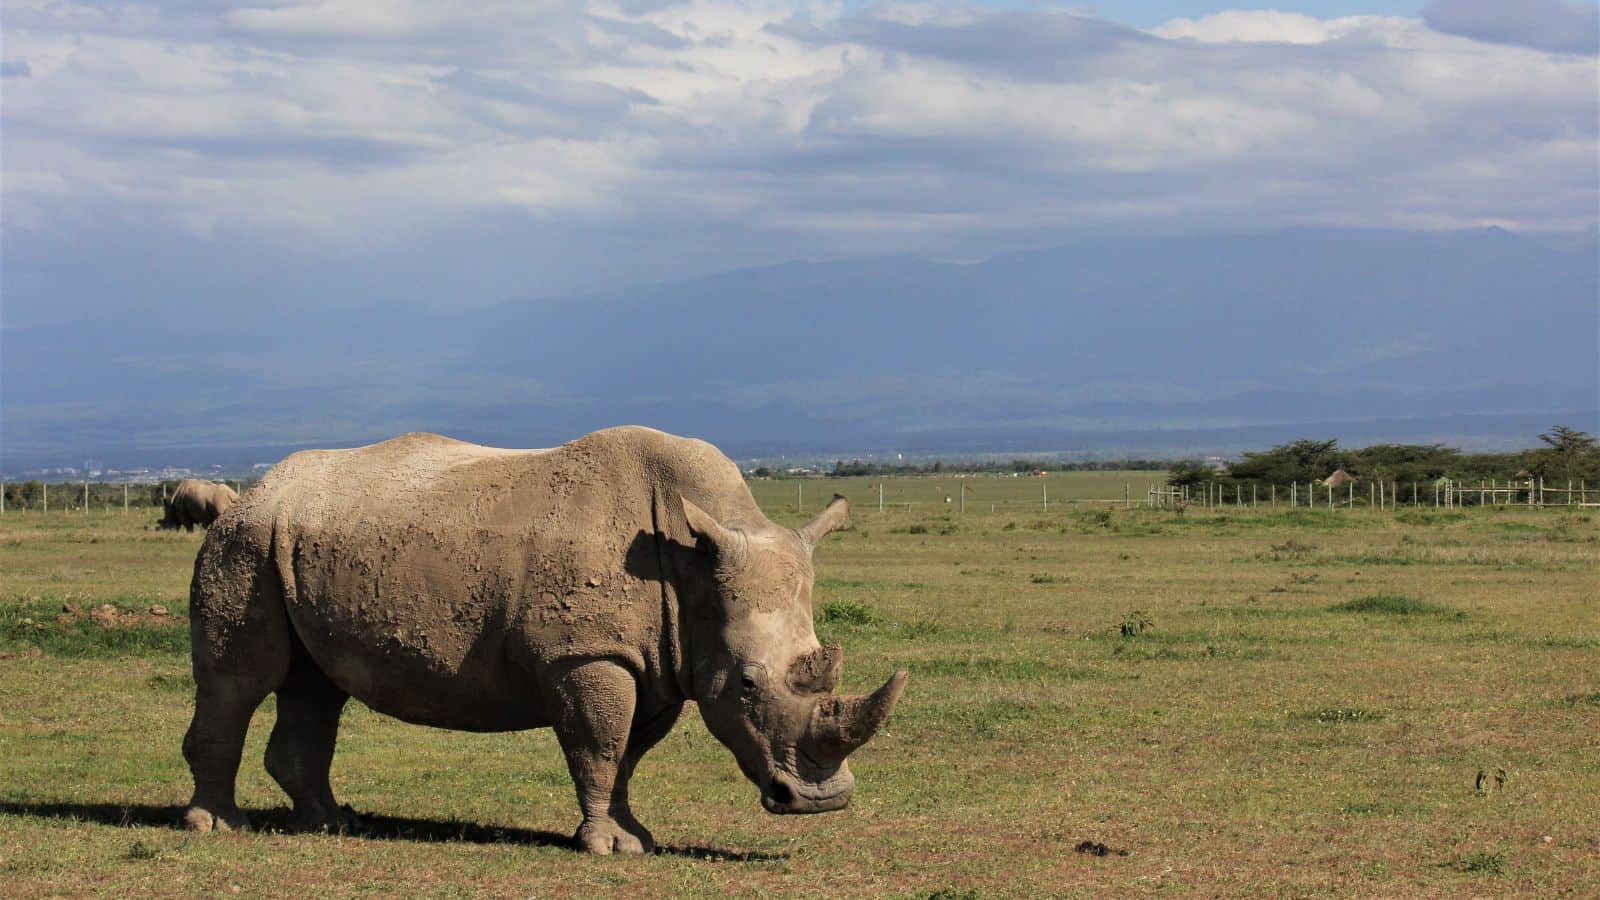 <p><span>The Northern White Rhino is on the absolute brink of extinction, with only two females left under constant surveillance. Because of this dire situation, there have been groundbreaking scientific efforts to save the species through innovative methods like IVF and stem cell technologies.</span></p>